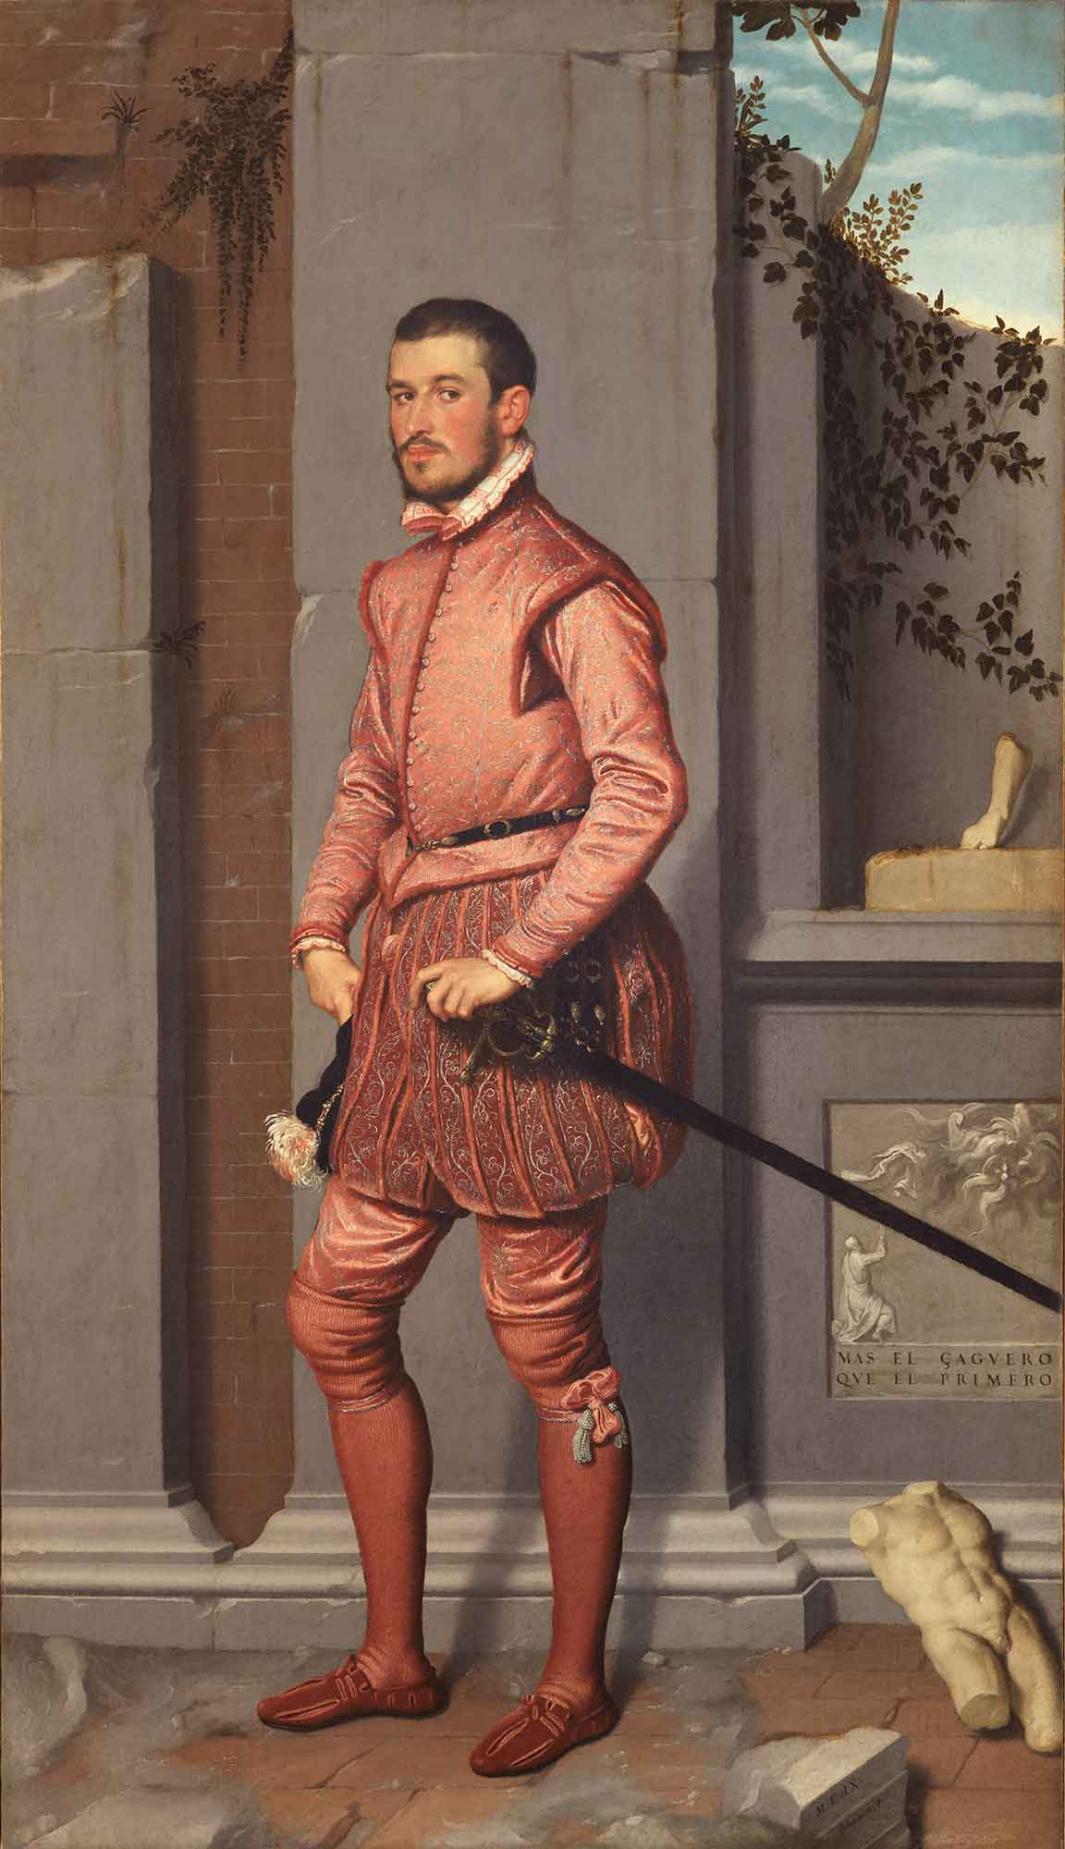 standing man dressed in pink formal wear, with sword at his side